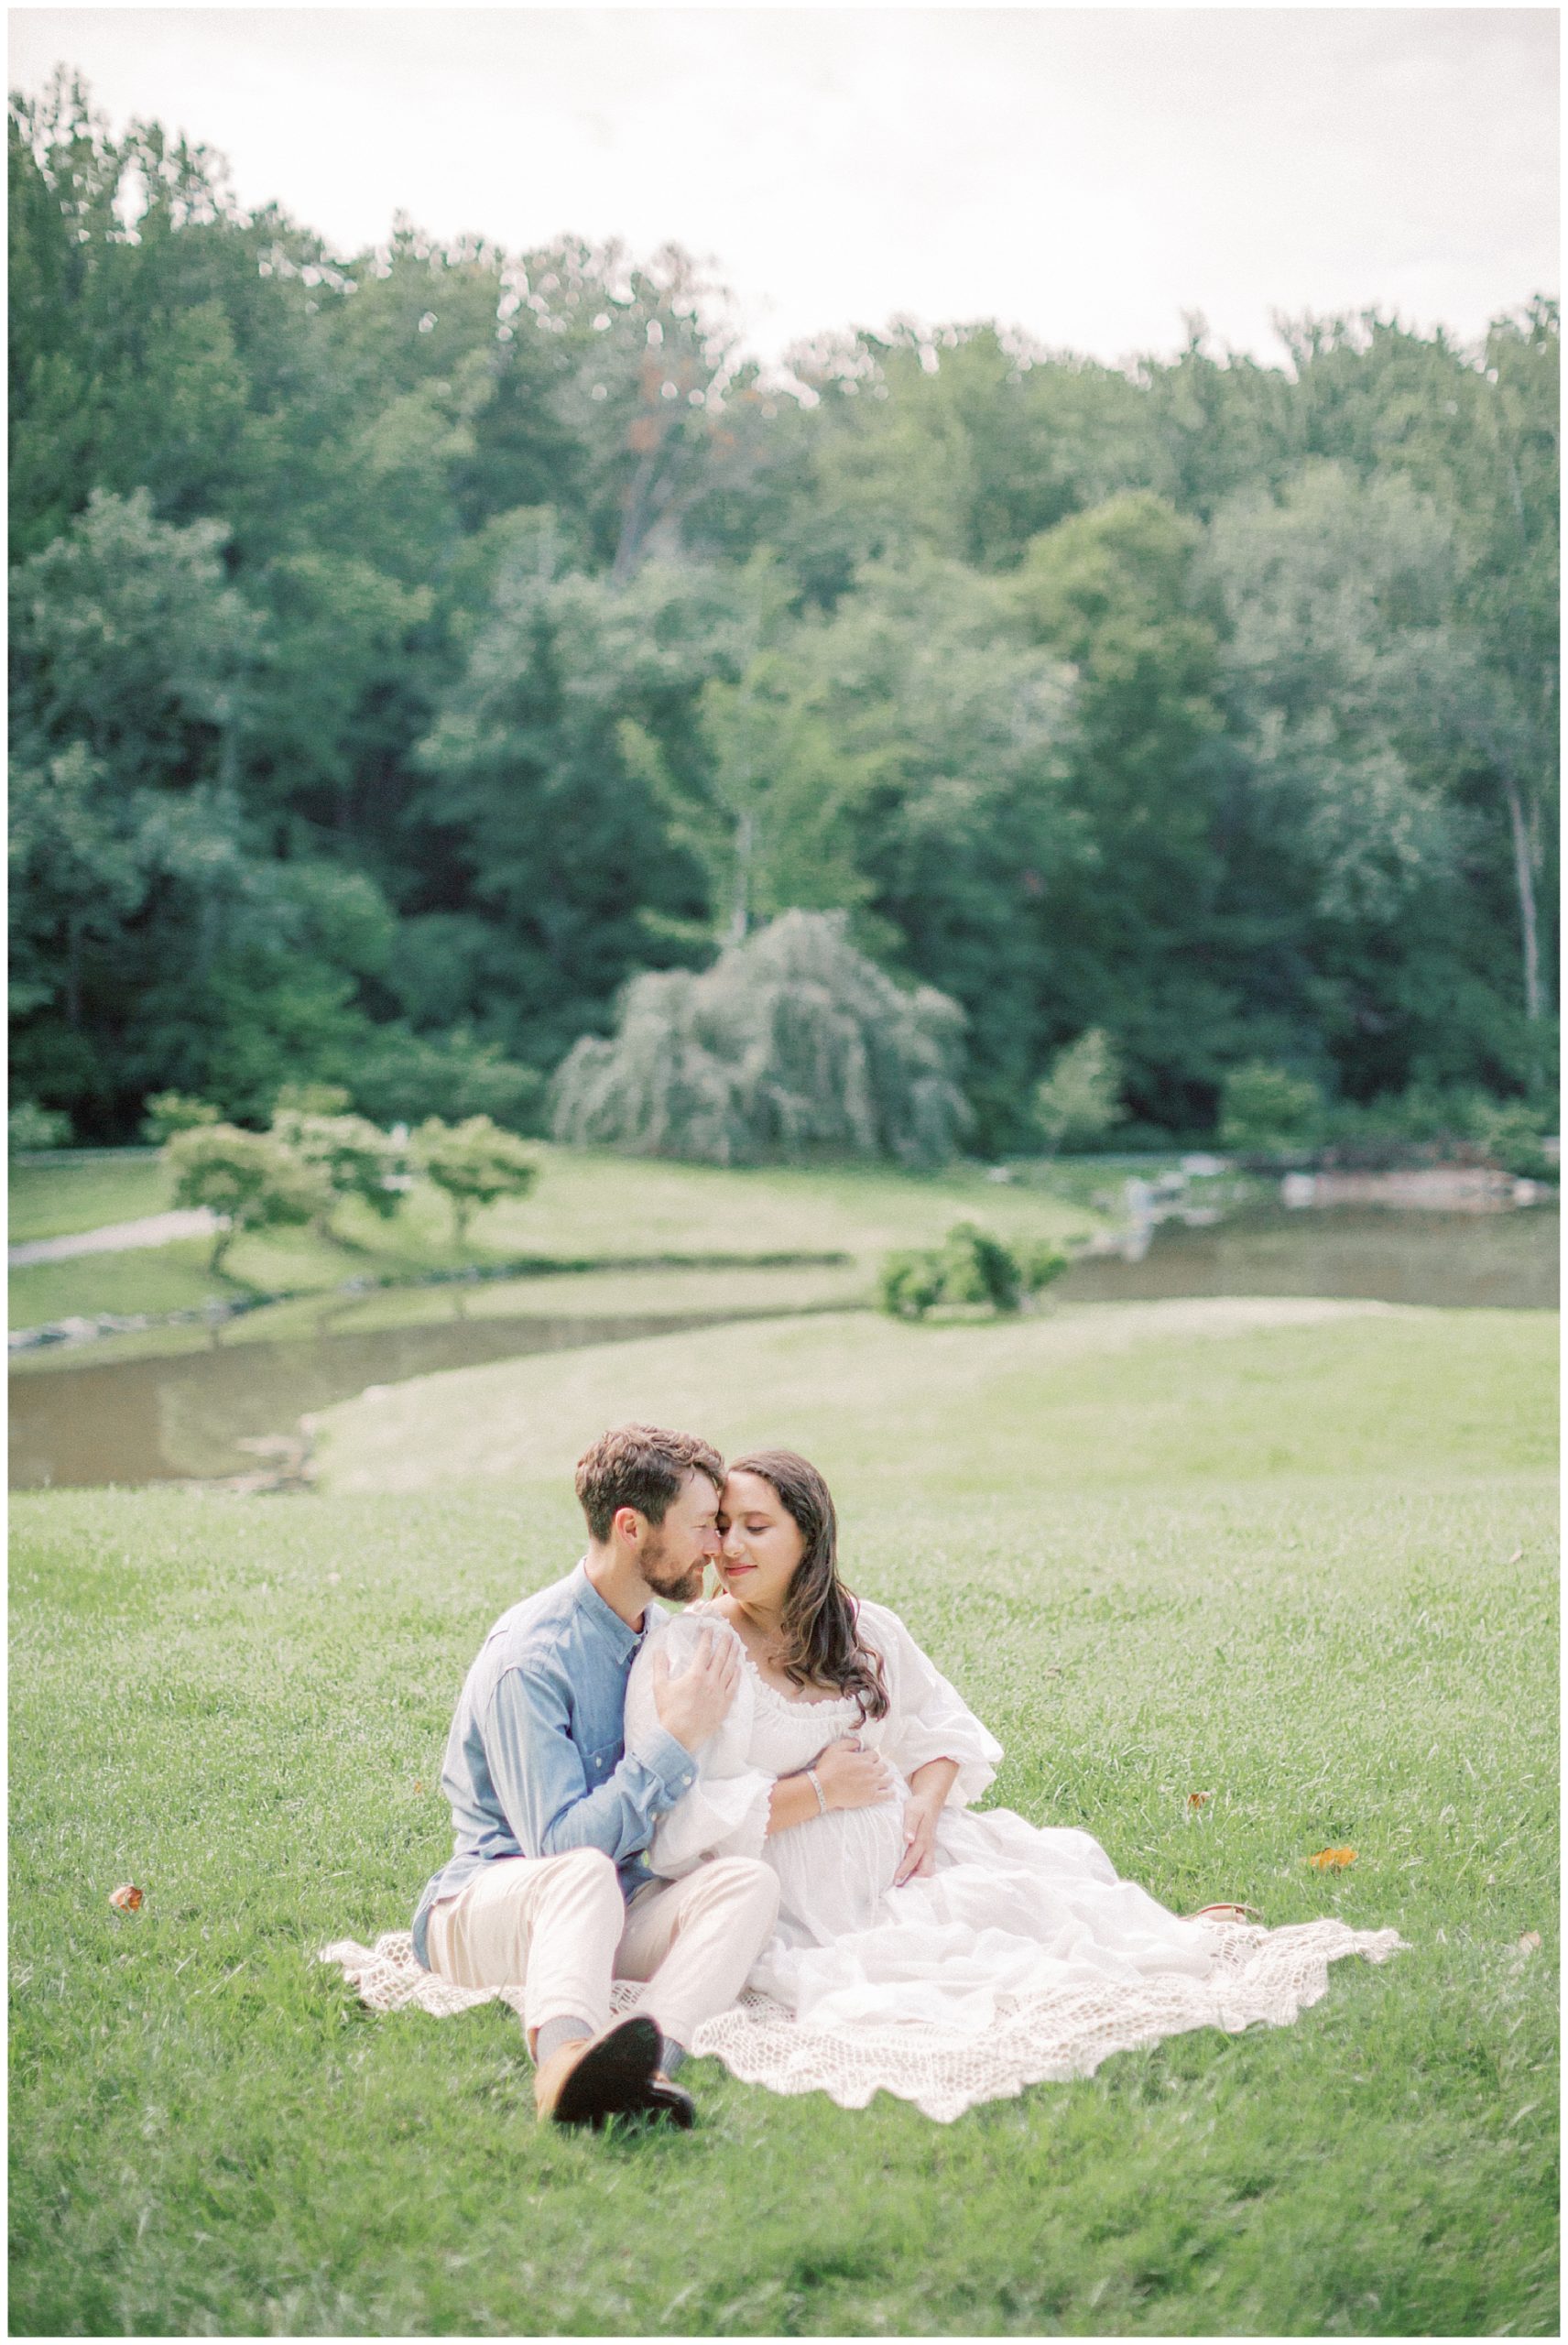 Expecting father and mother sit on blanket in an open lawn during their maternity session.